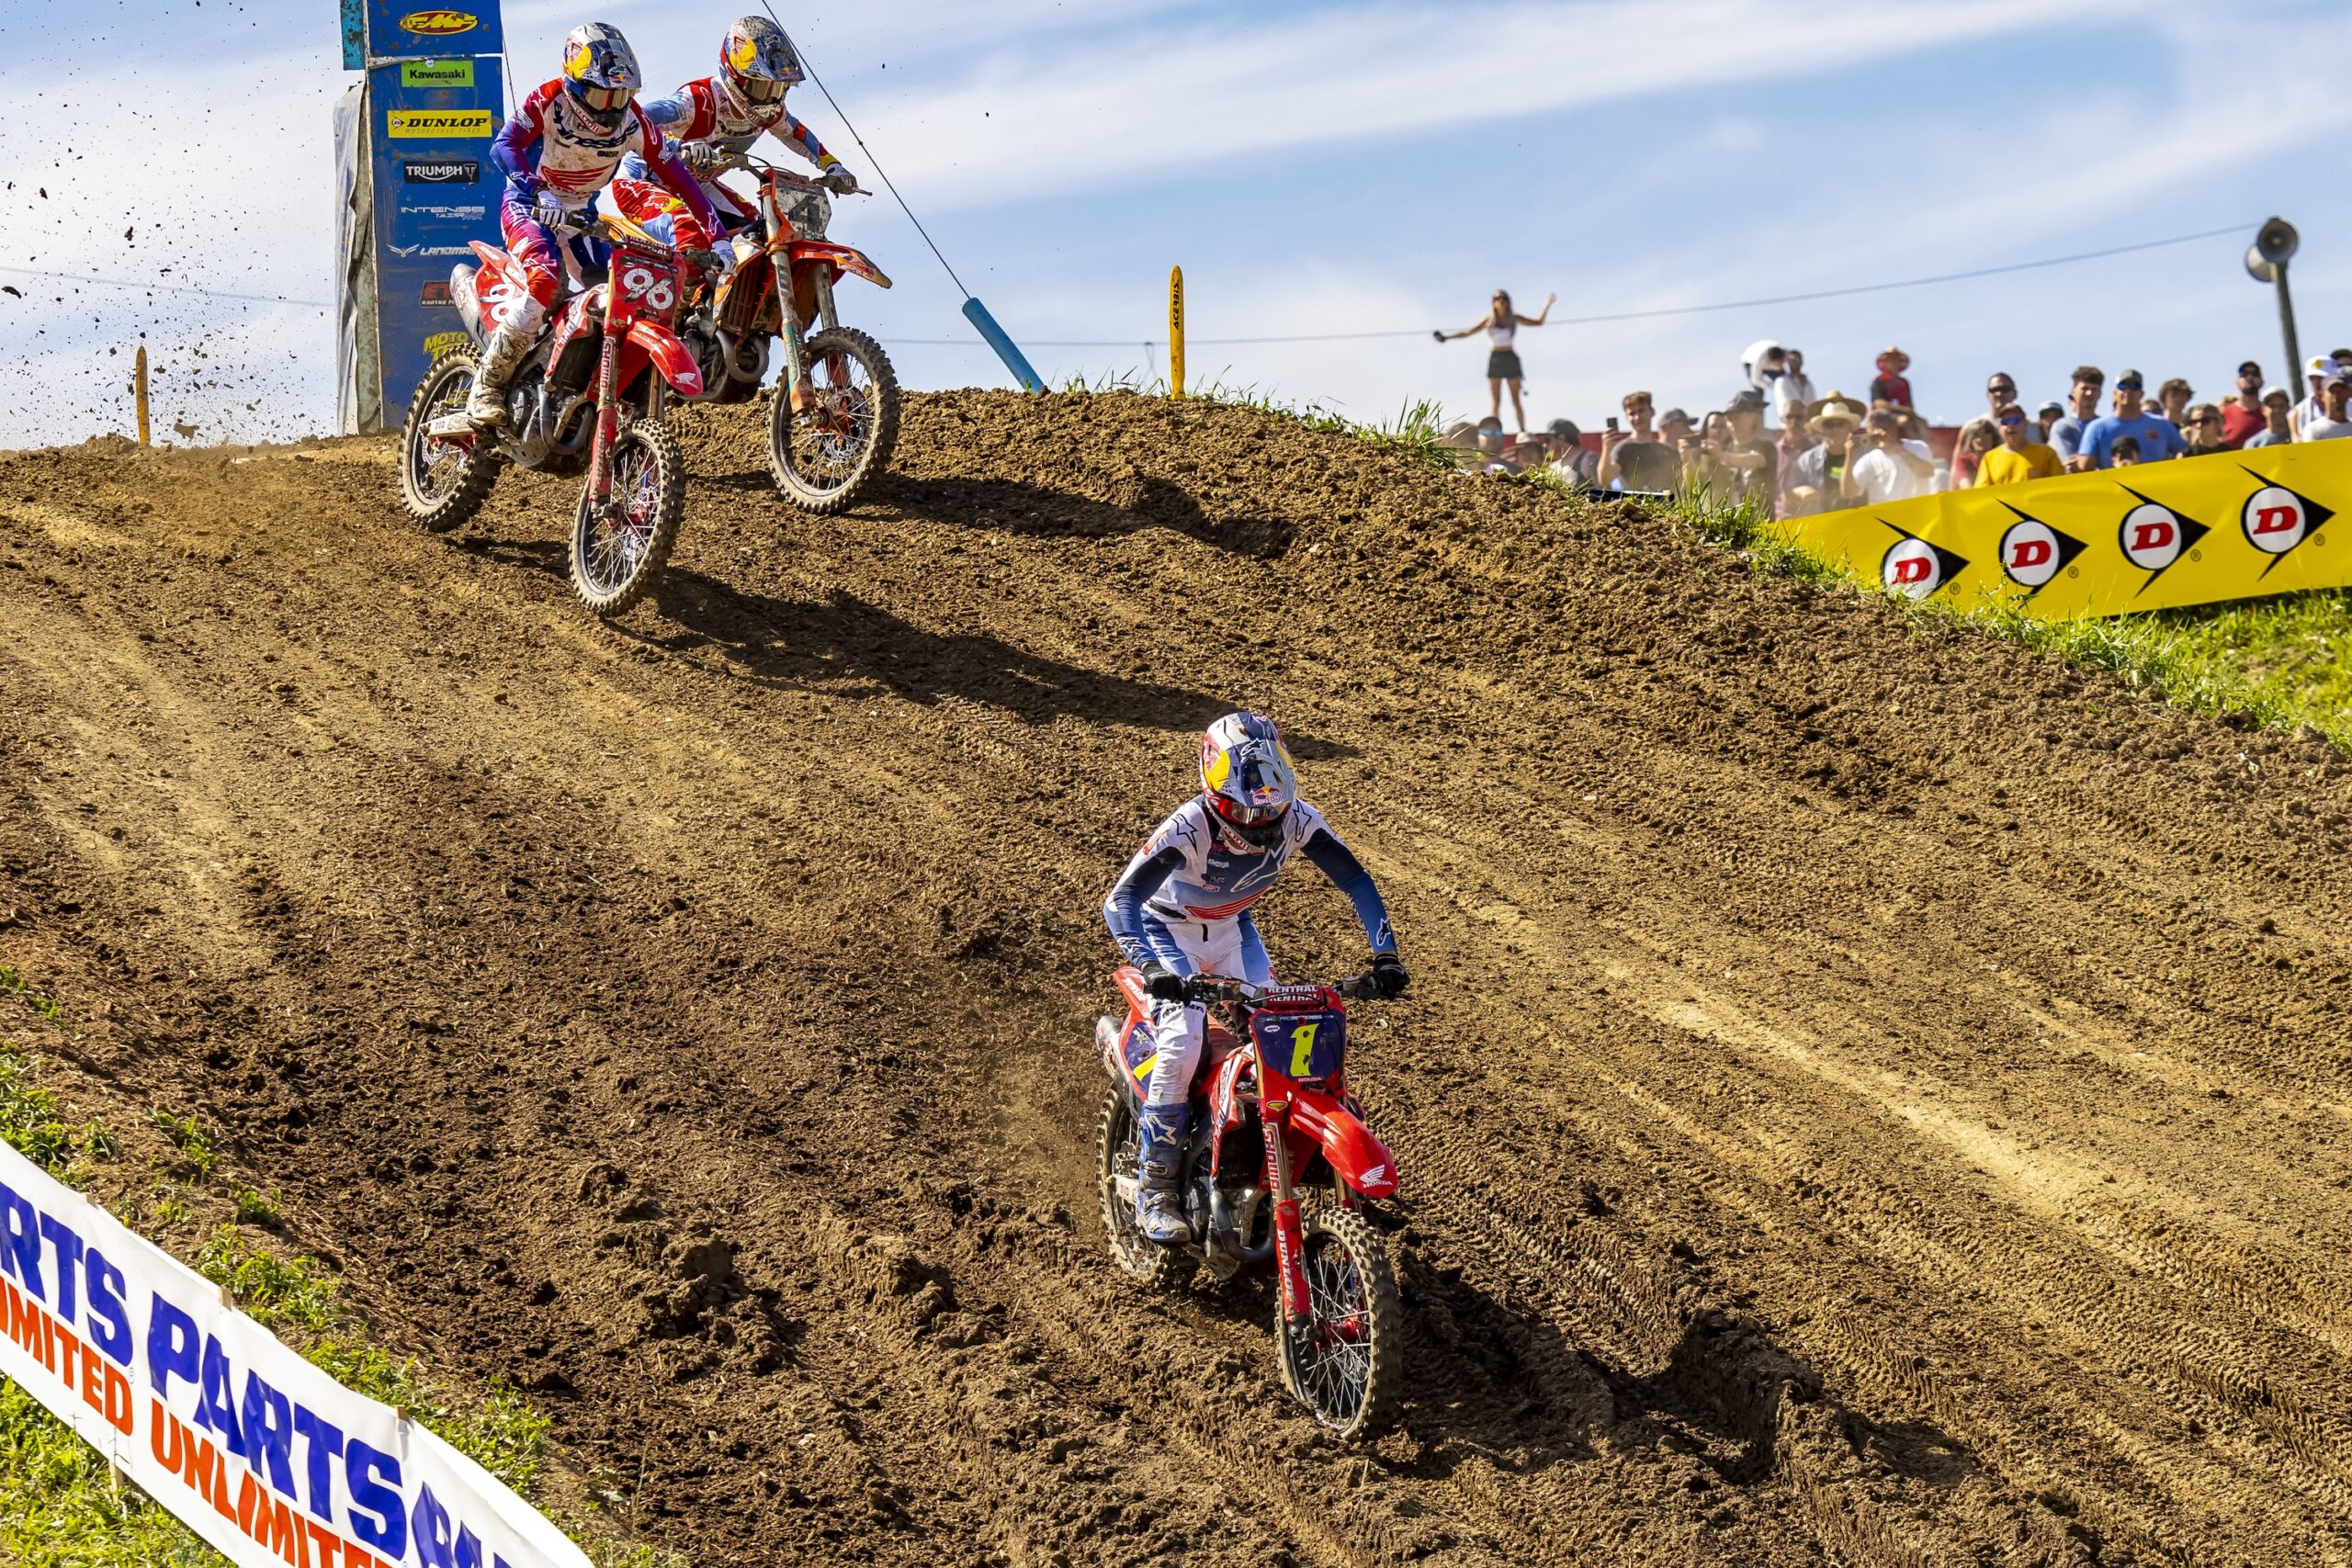 Jett Lawrence withstood pressure from both Chase Sexton and Hunter Lawrence at the 2024 High Point Pro Motocross. Photo: Garth Milan